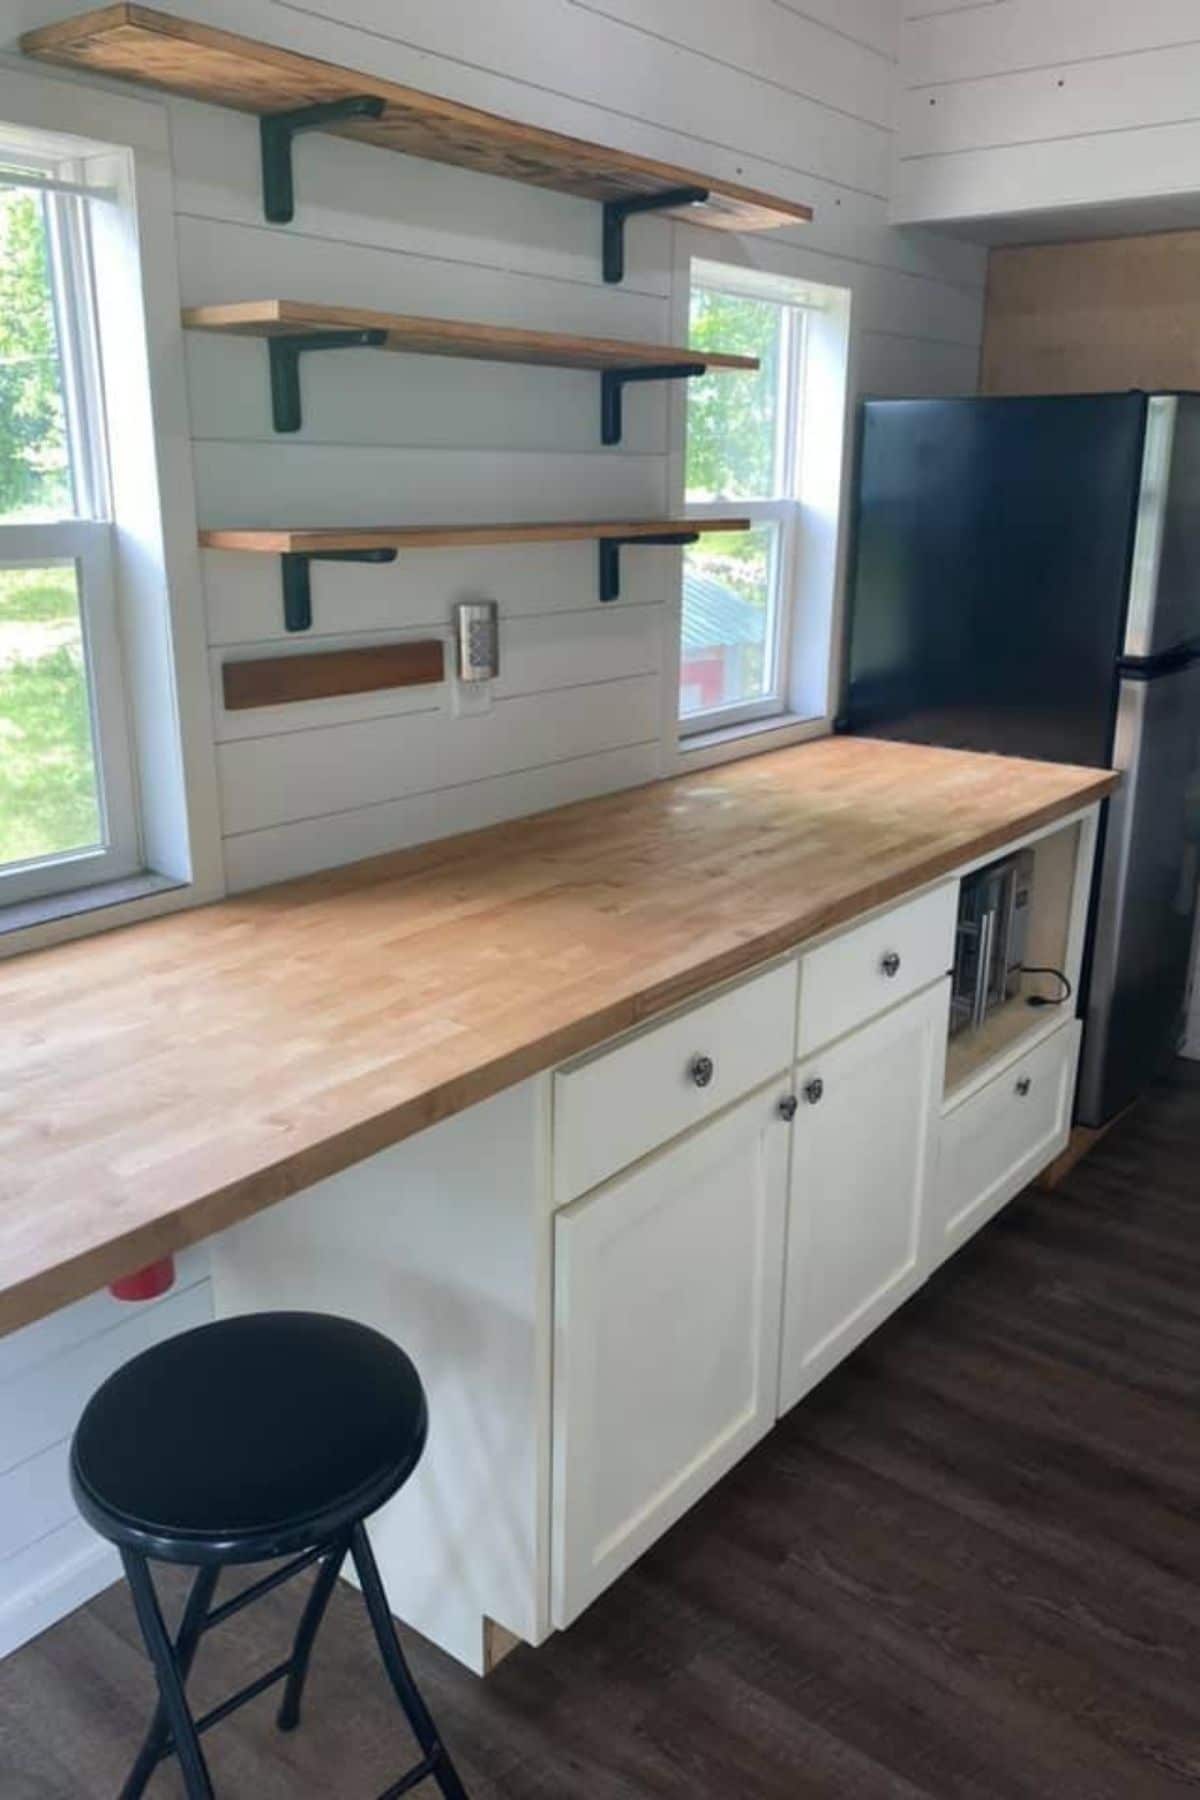 Kitchen counter with stool under open space and floating shelves